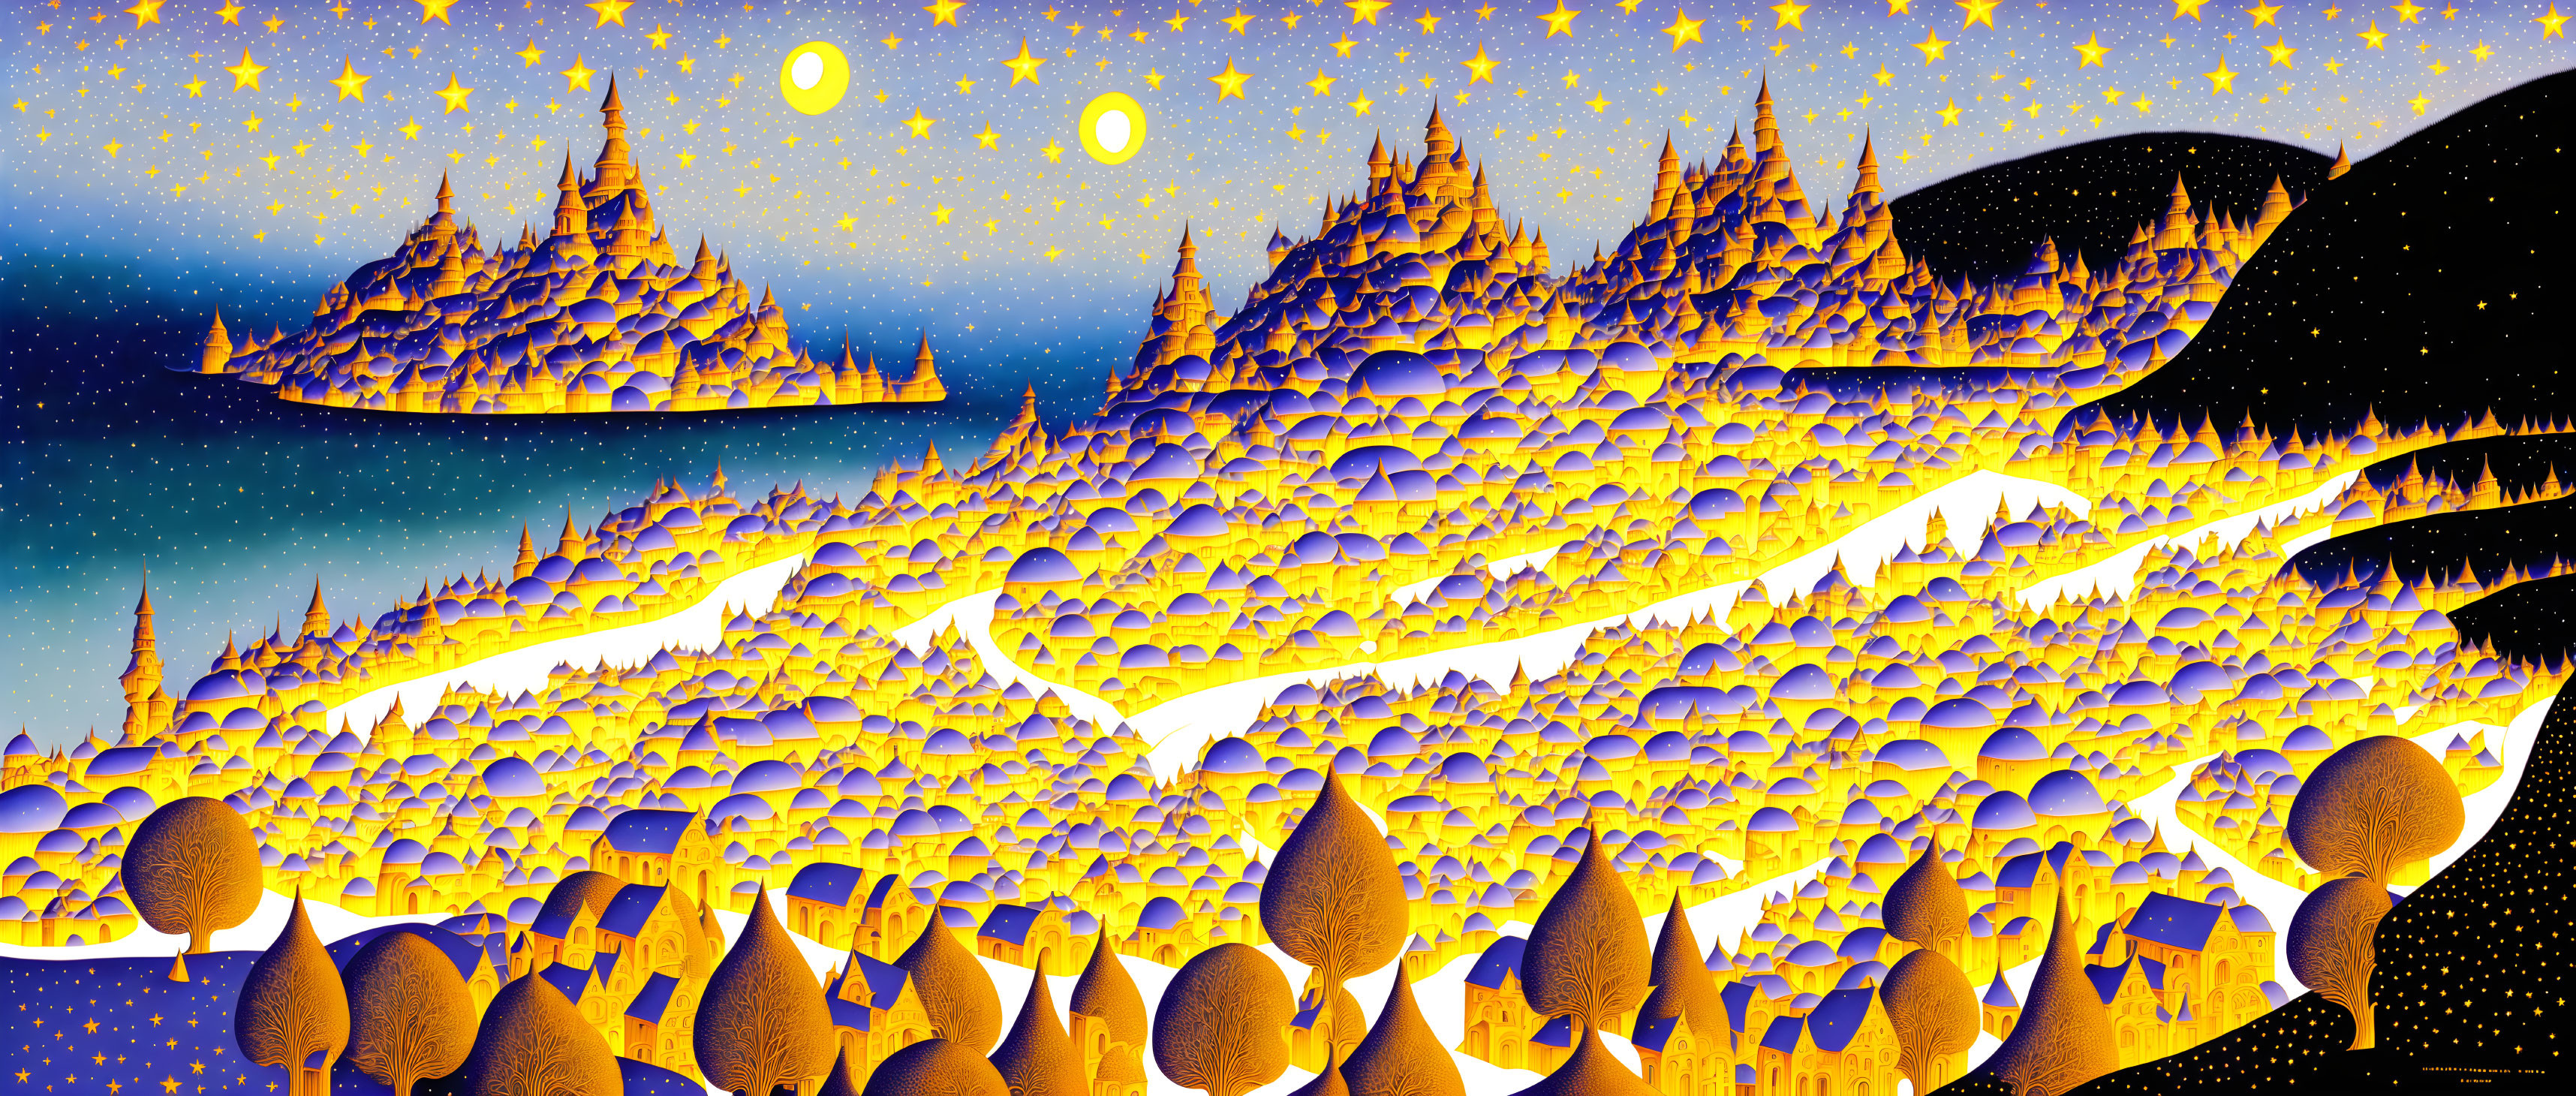 Surreal landscape with golden mountains under cosmic sky